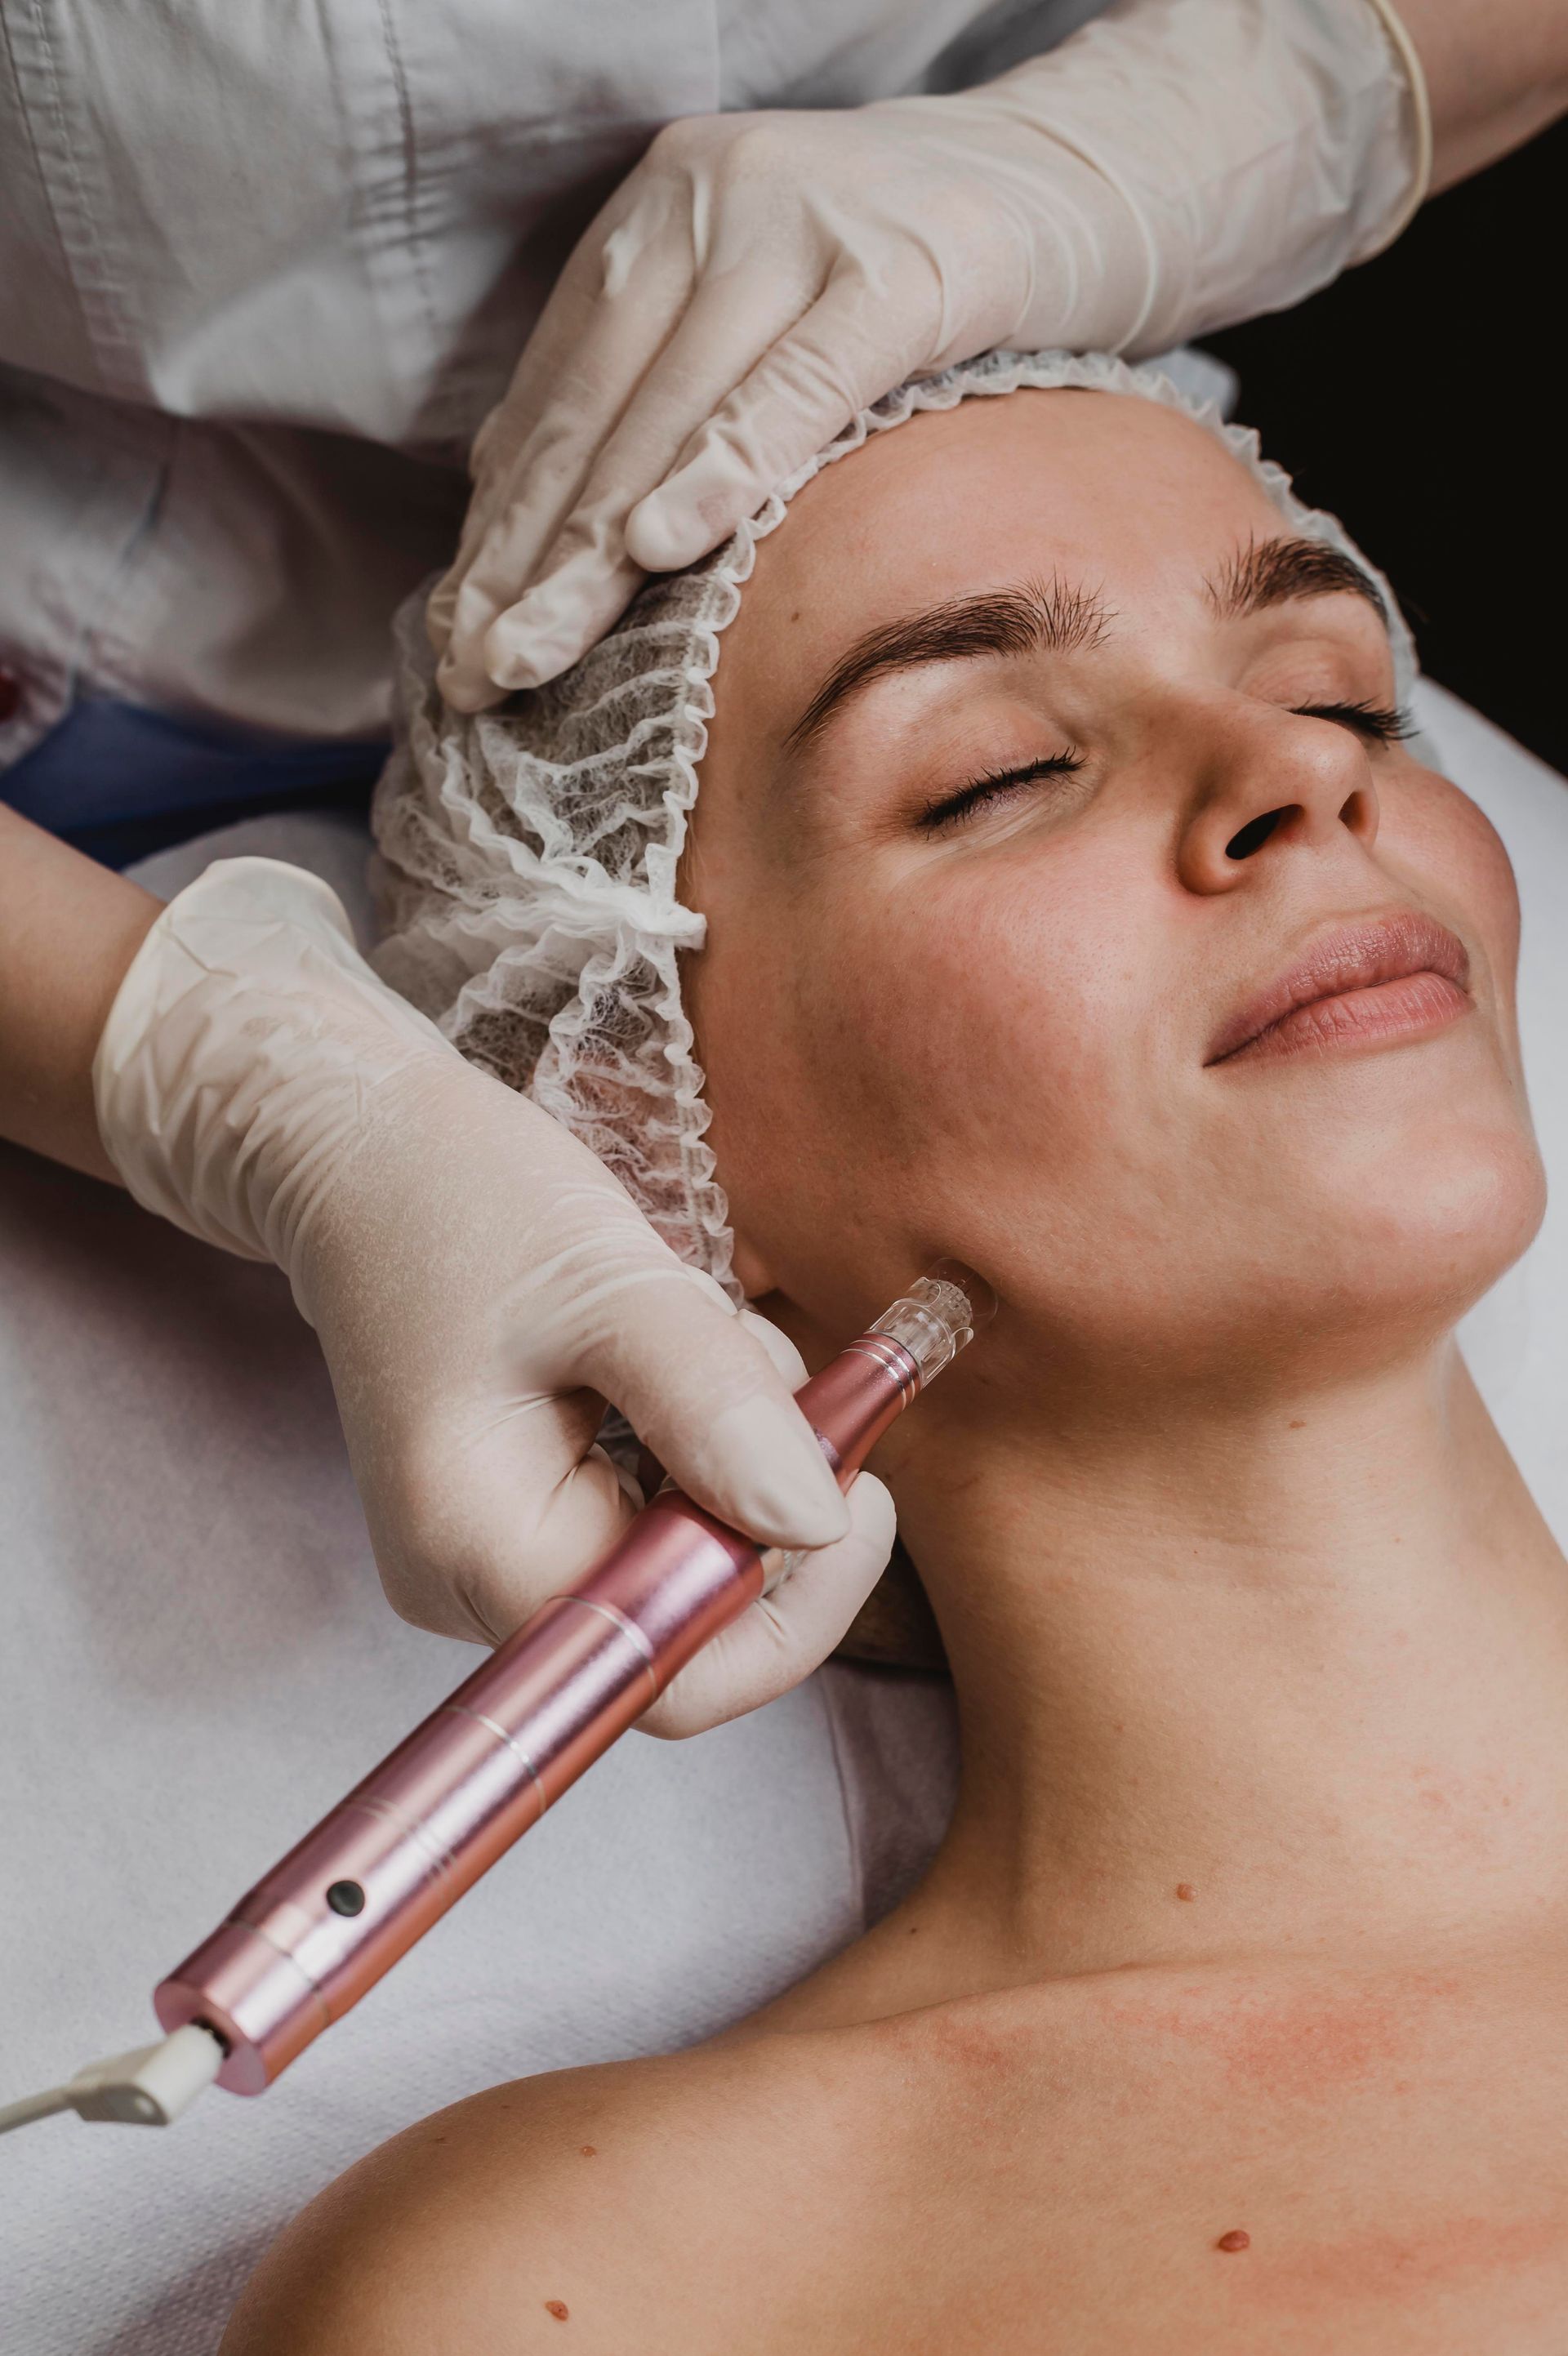 a woman is getting a facial treatment with a device that says ' derma pen ' on it